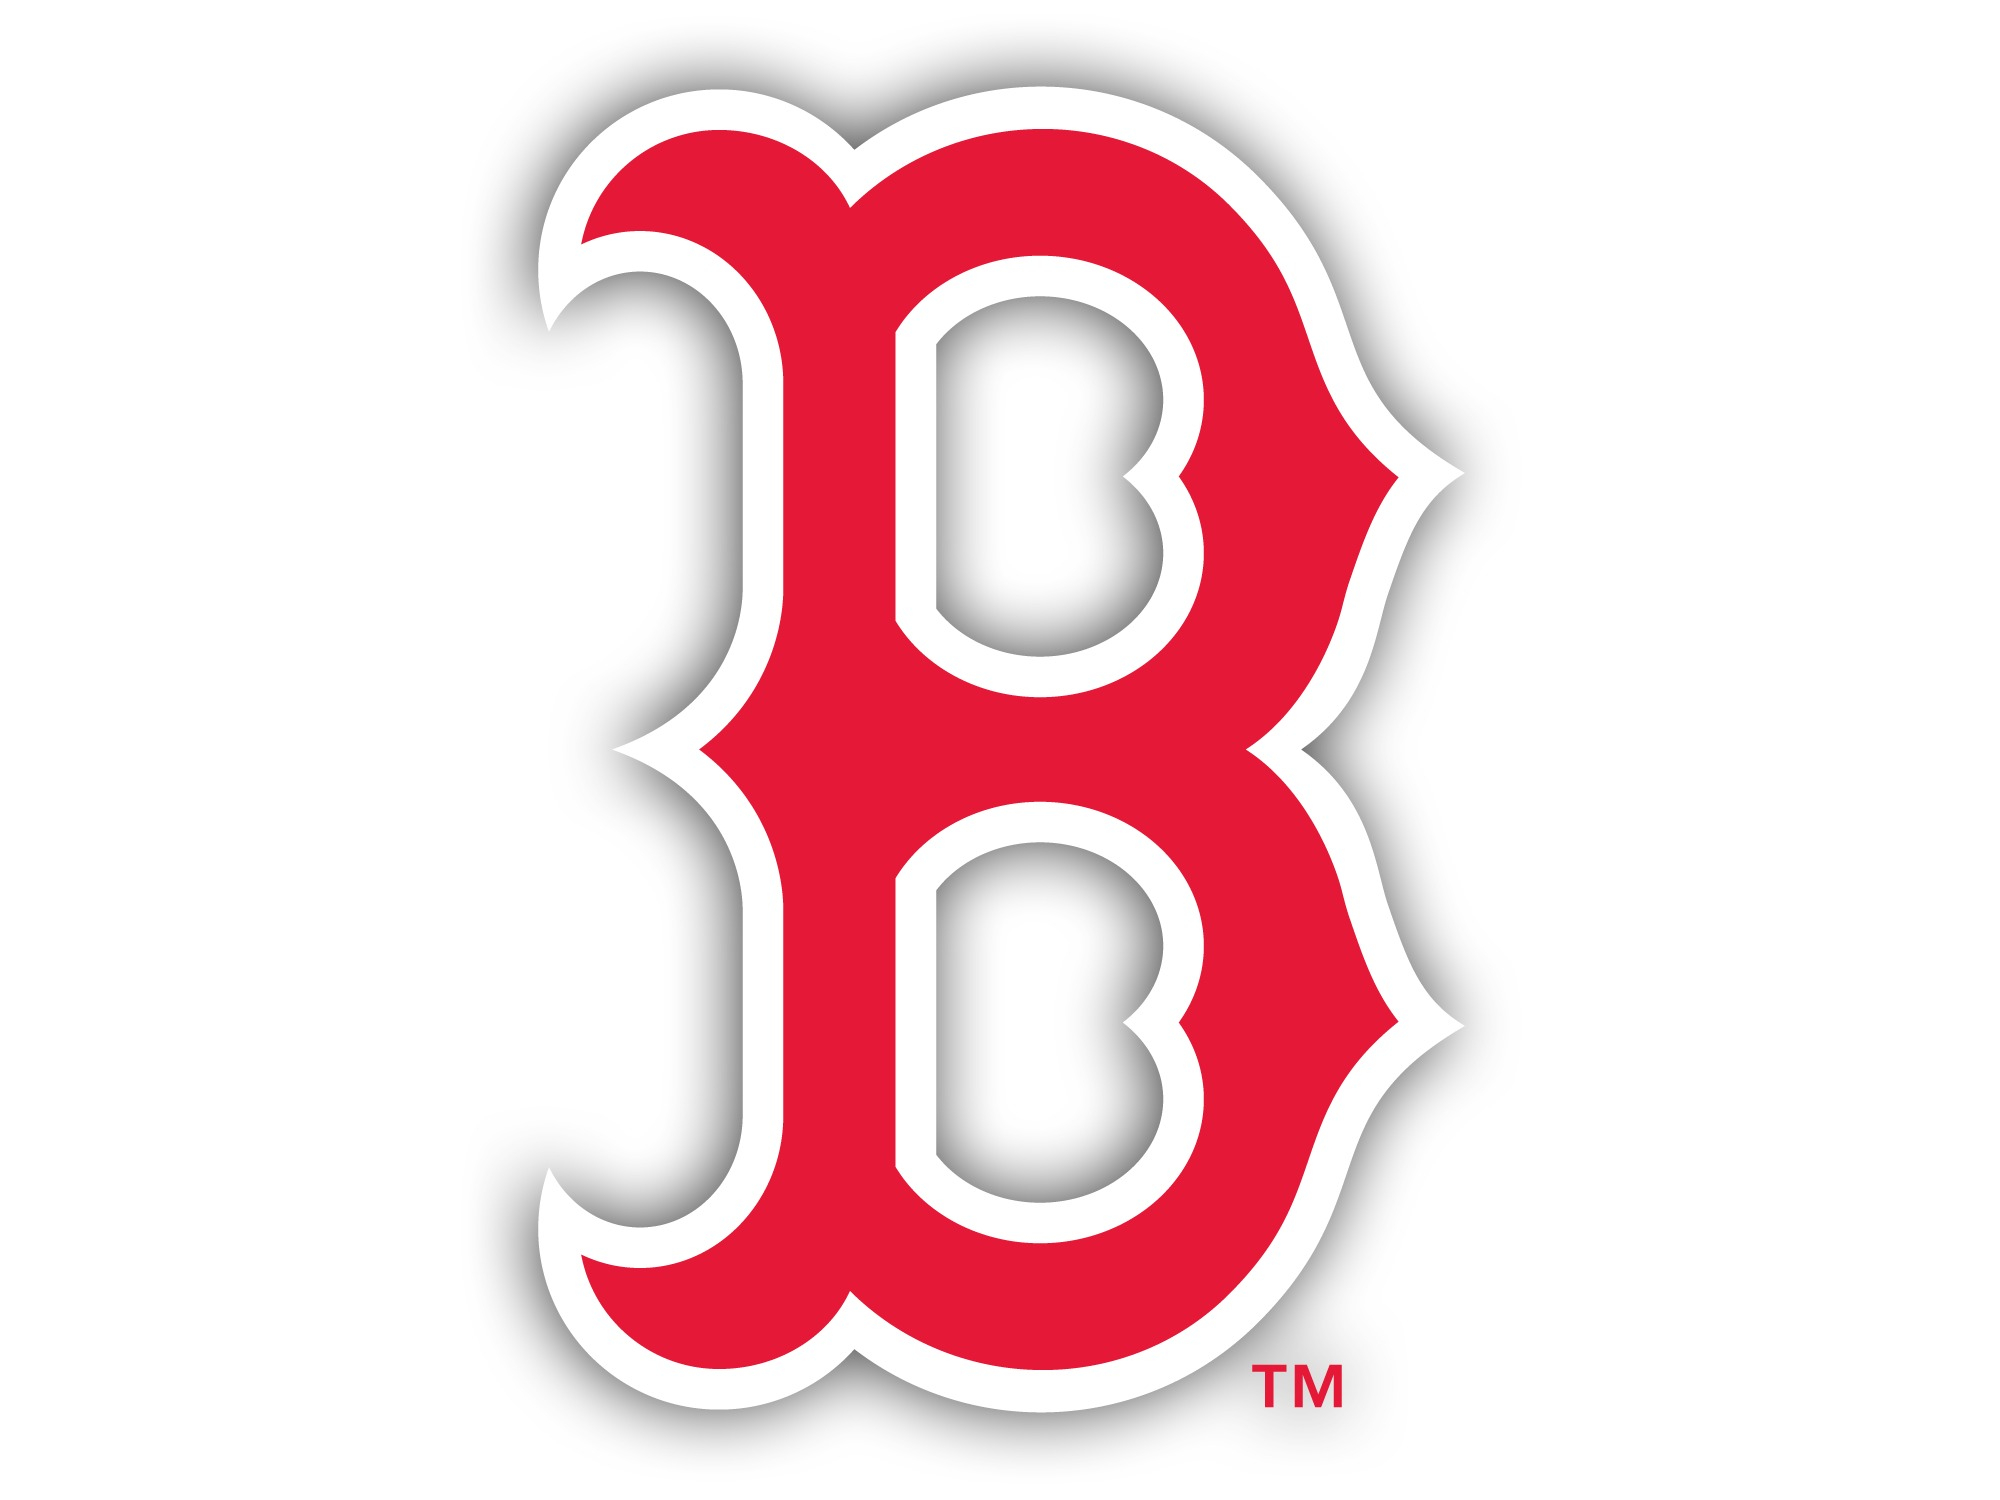 2000x1500 Free Red Sox Logo Jpg, Download Free Red Sox Logo Jpg png images, Free ClipArts on Clipart Library